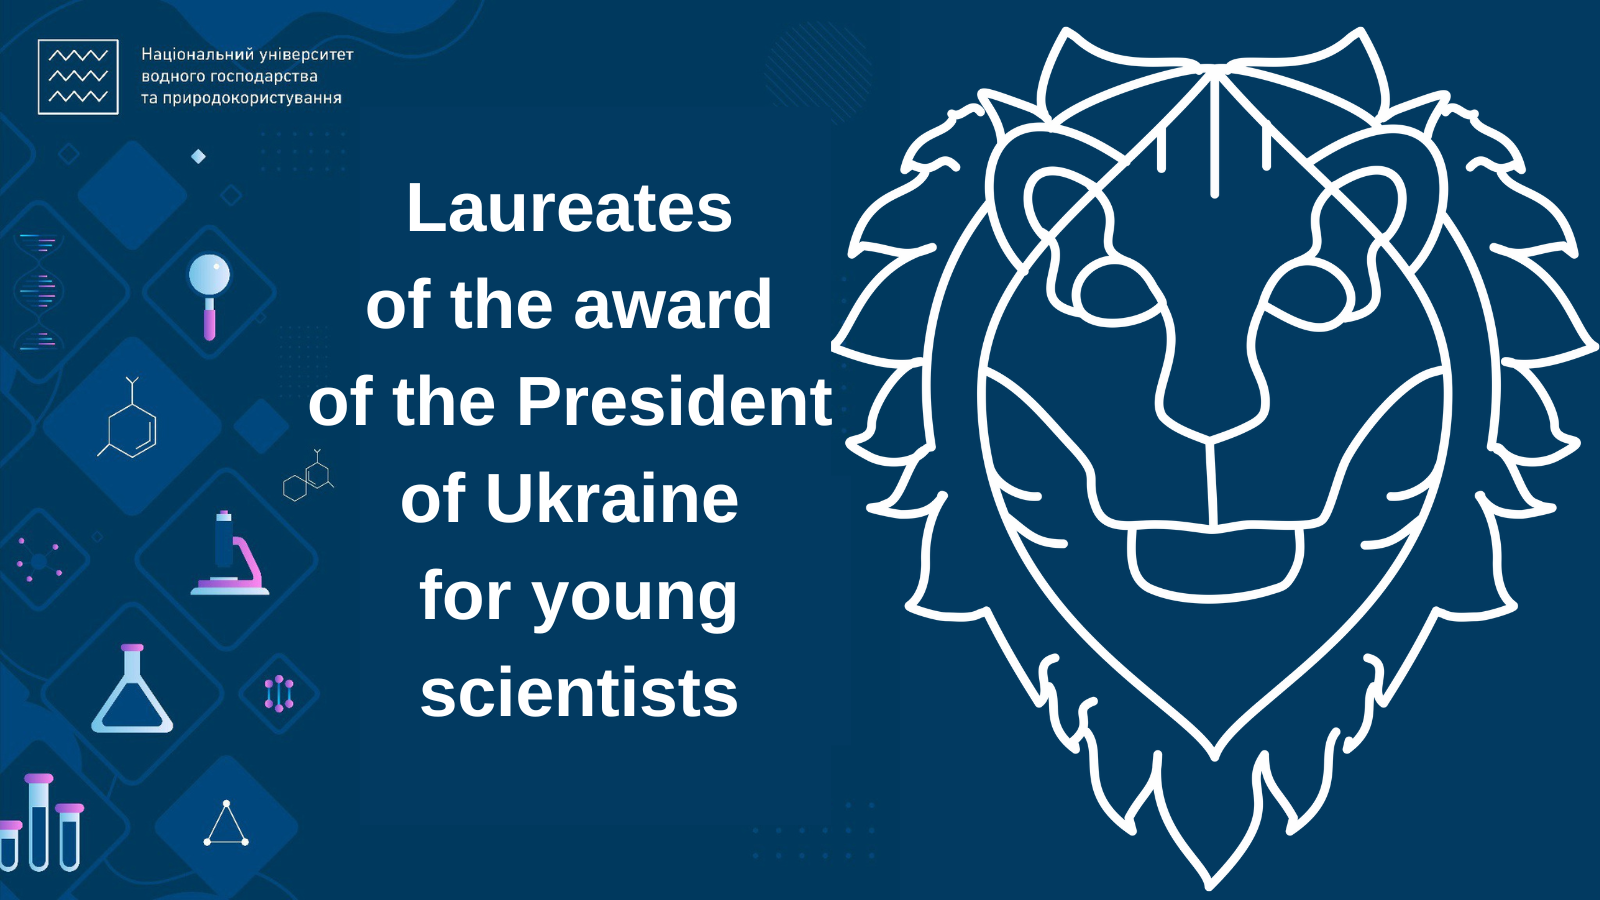 Laureates of the award of the President of Ukraine for young scientists